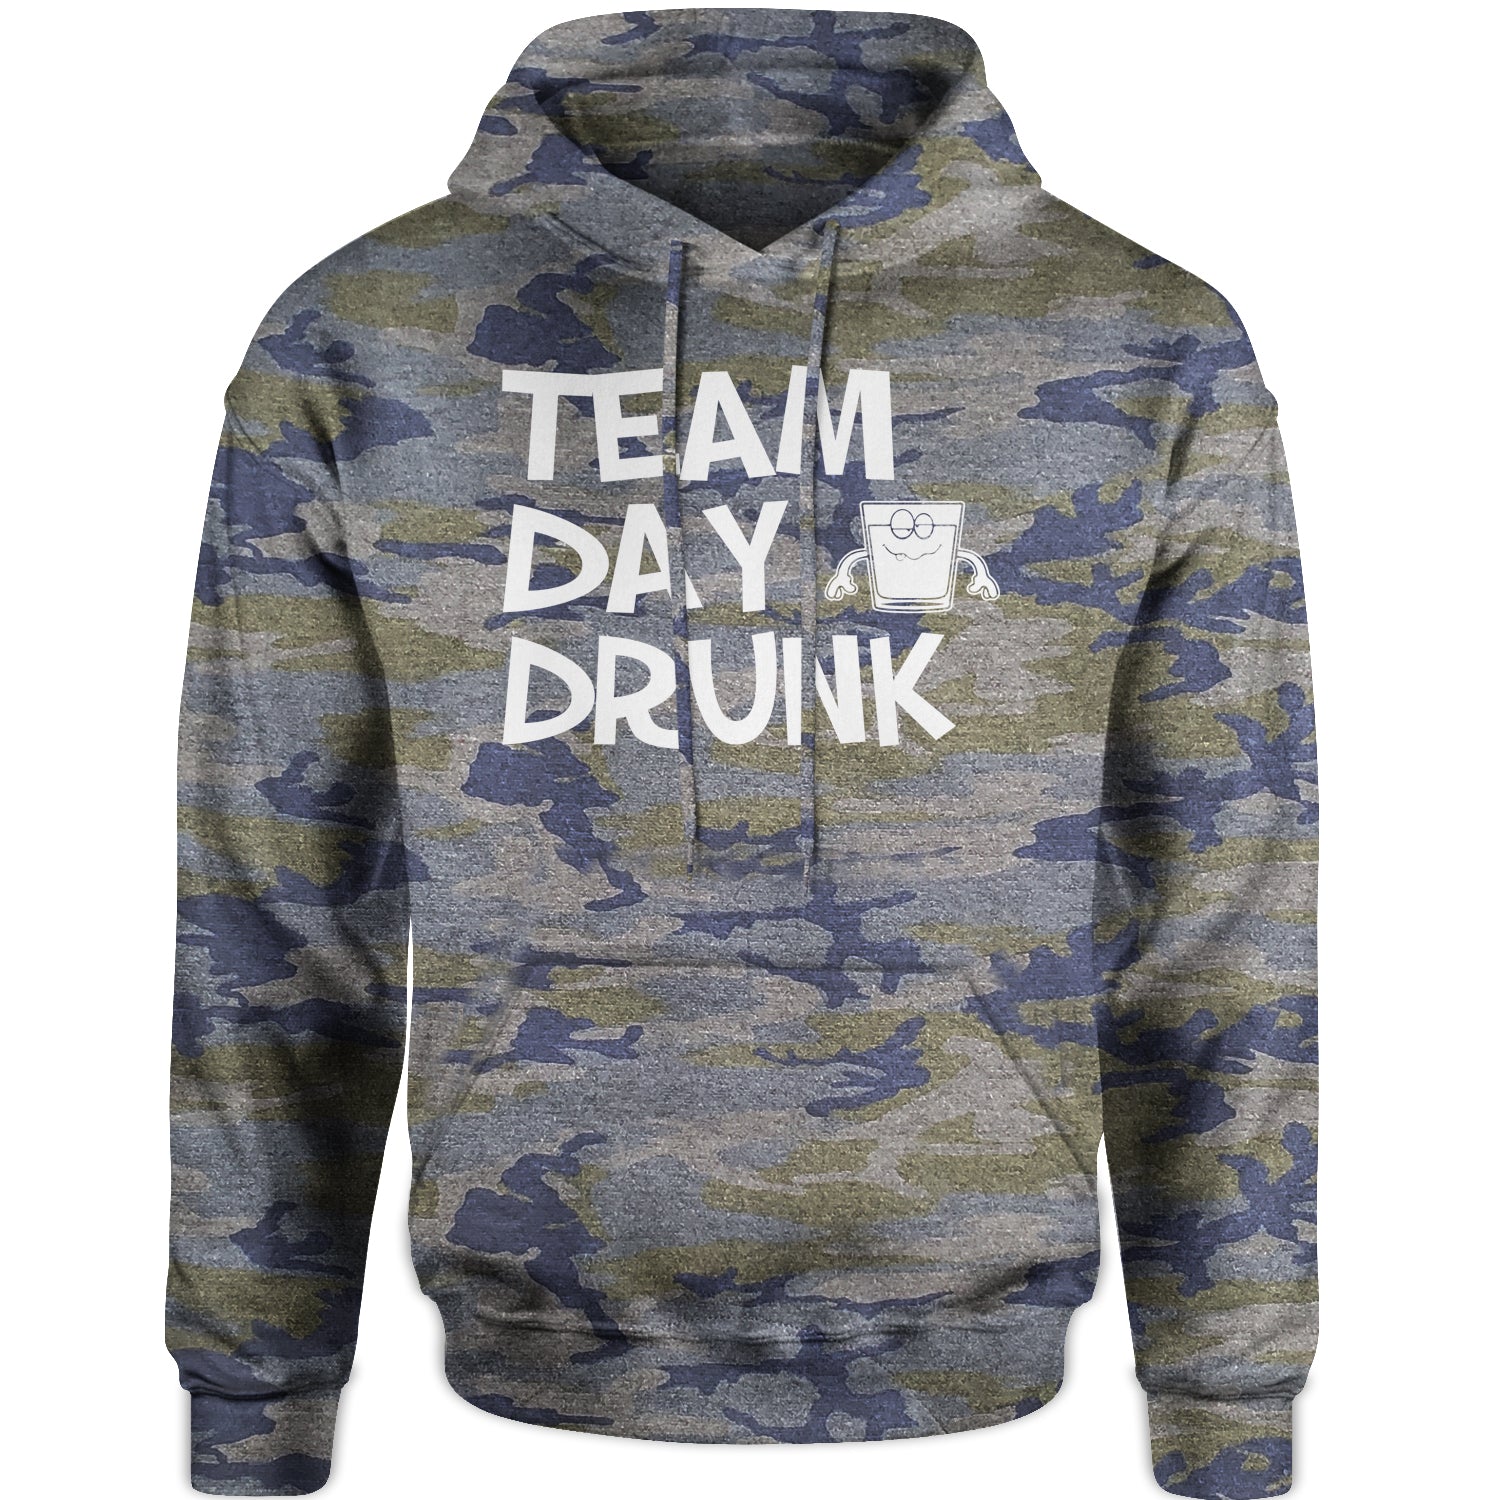 Team Day Drunk Adult Hoodie Sweatshirt beer, day, drinking, fun, funday, shots, Sunday, tatsing, wine by Expression Tees